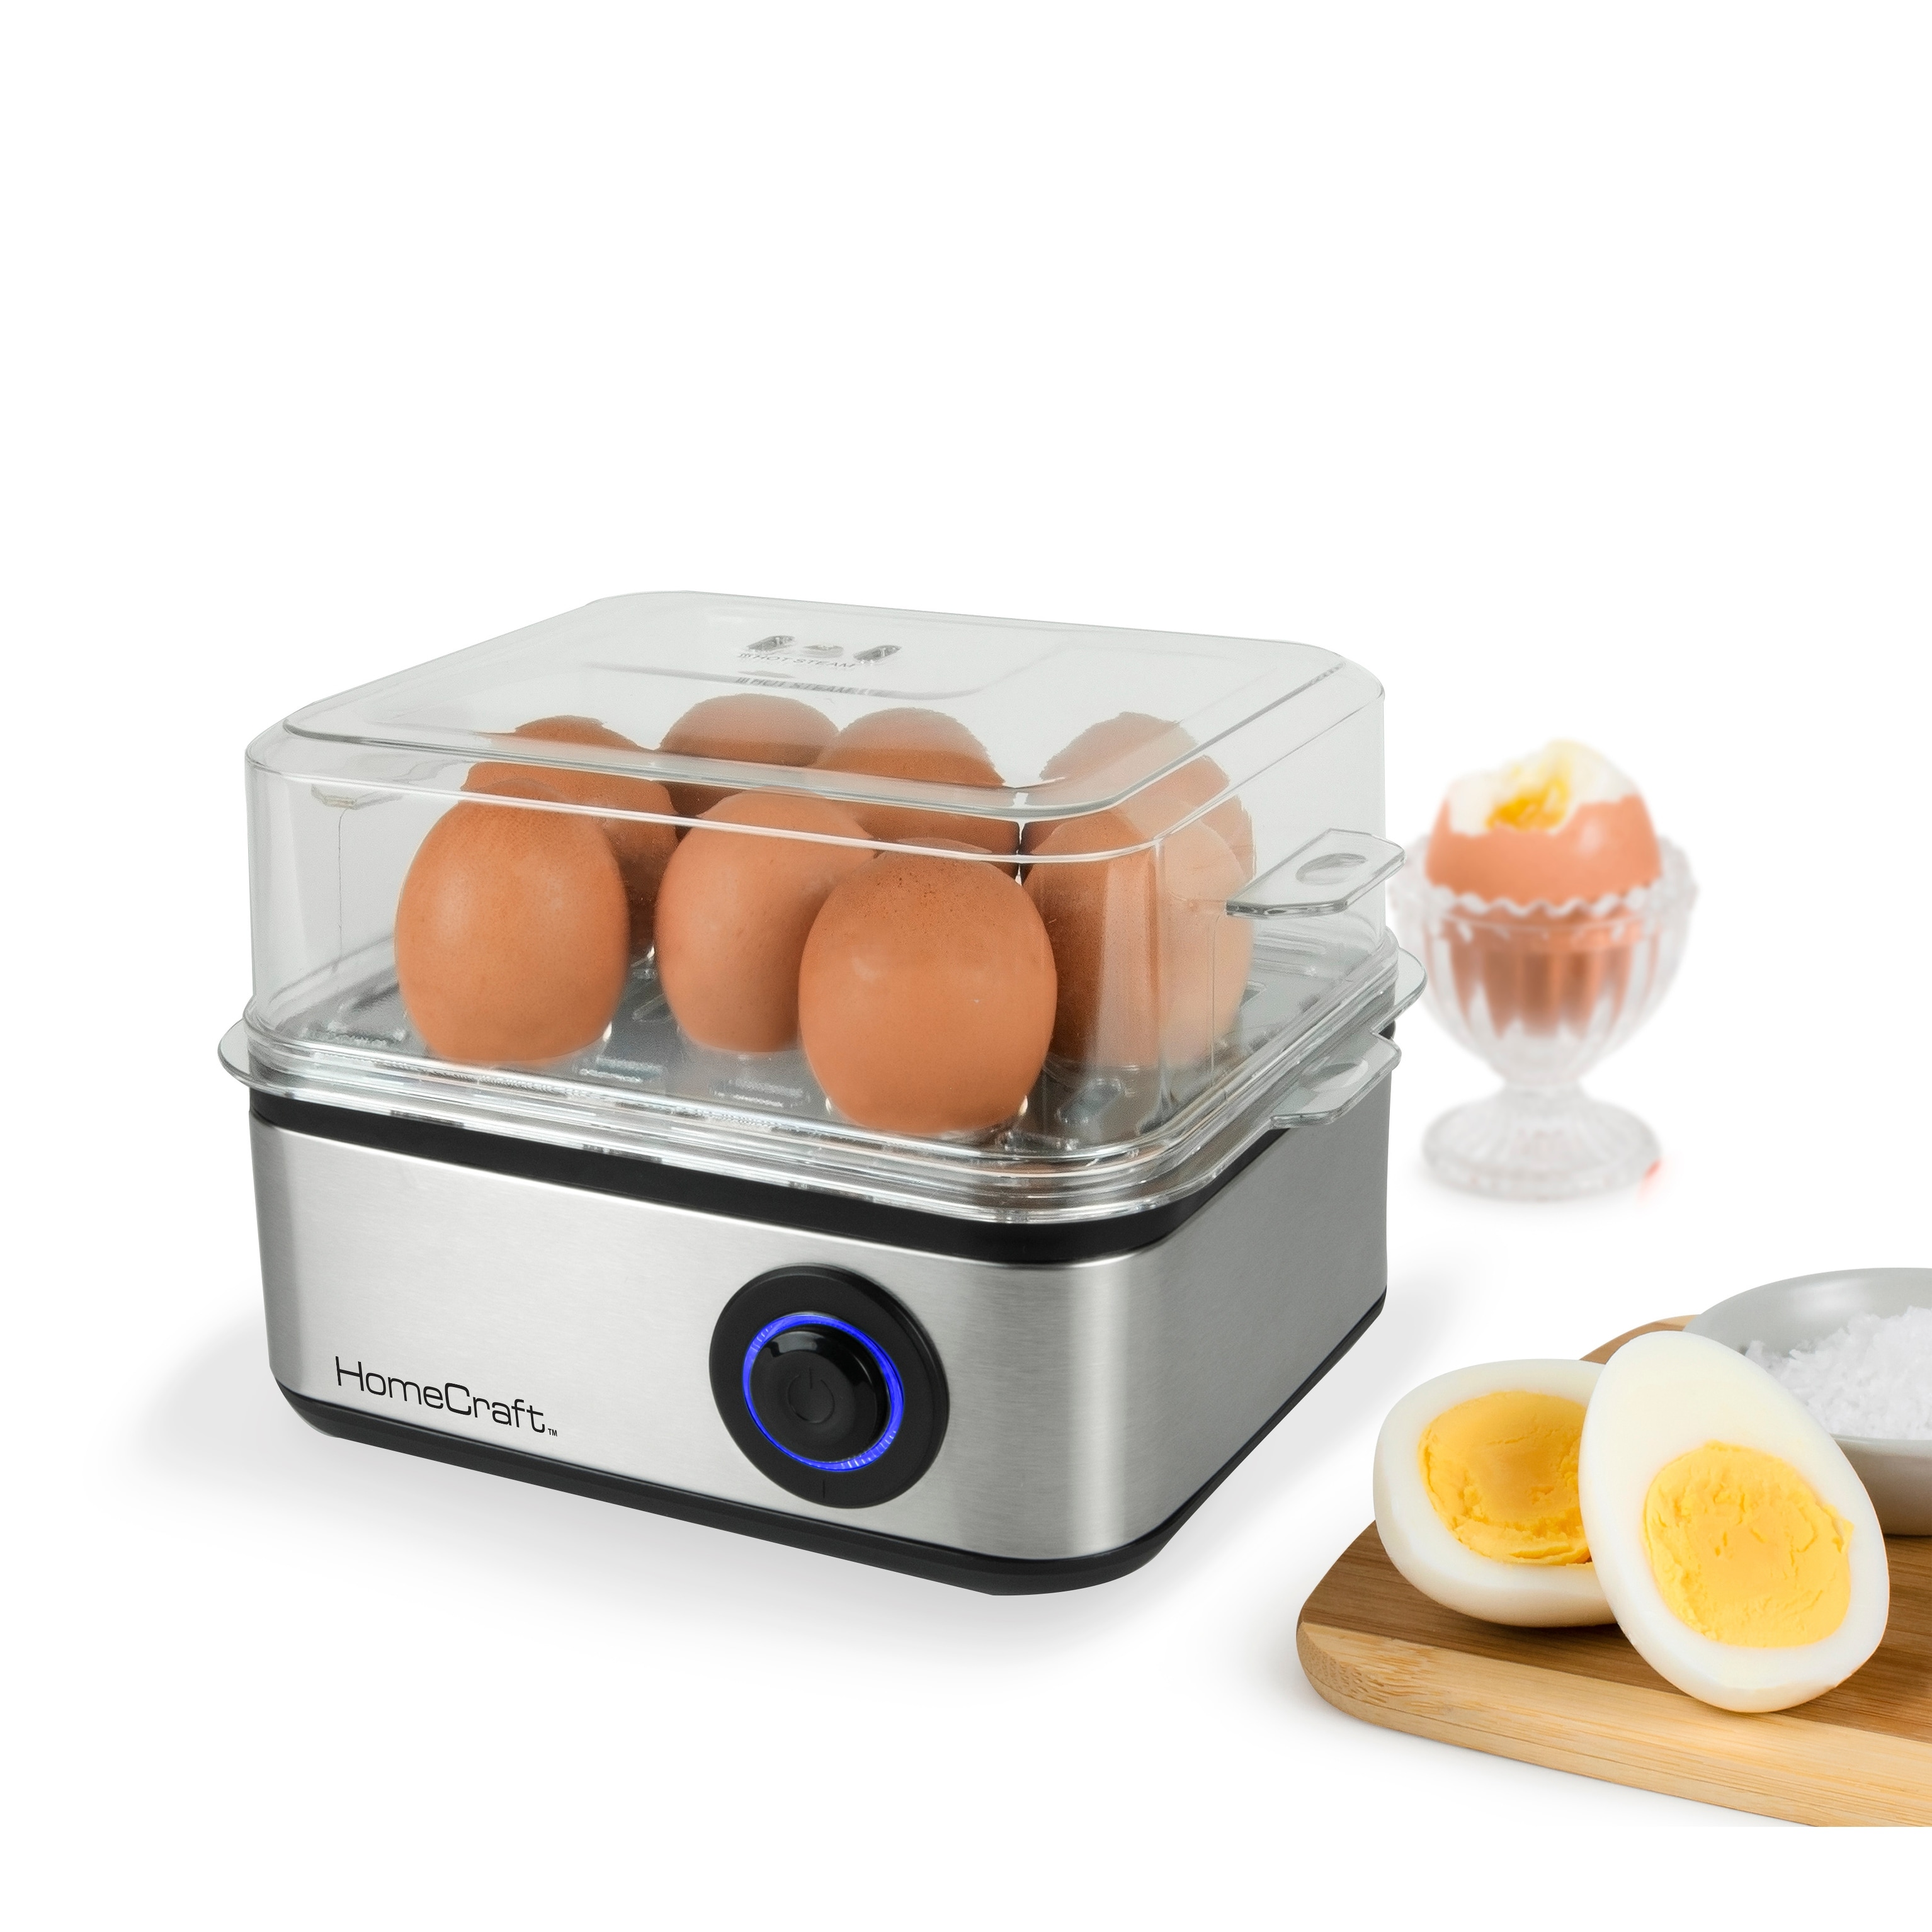 https://ak1.ostkcdn.com/images/products/is/images/direct/20b20fde6598233ed55a6dd2a868280ea91969cf/HomeCraft-HCECS8SS-8-Egg-Cooker-with-Buzzer.jpg